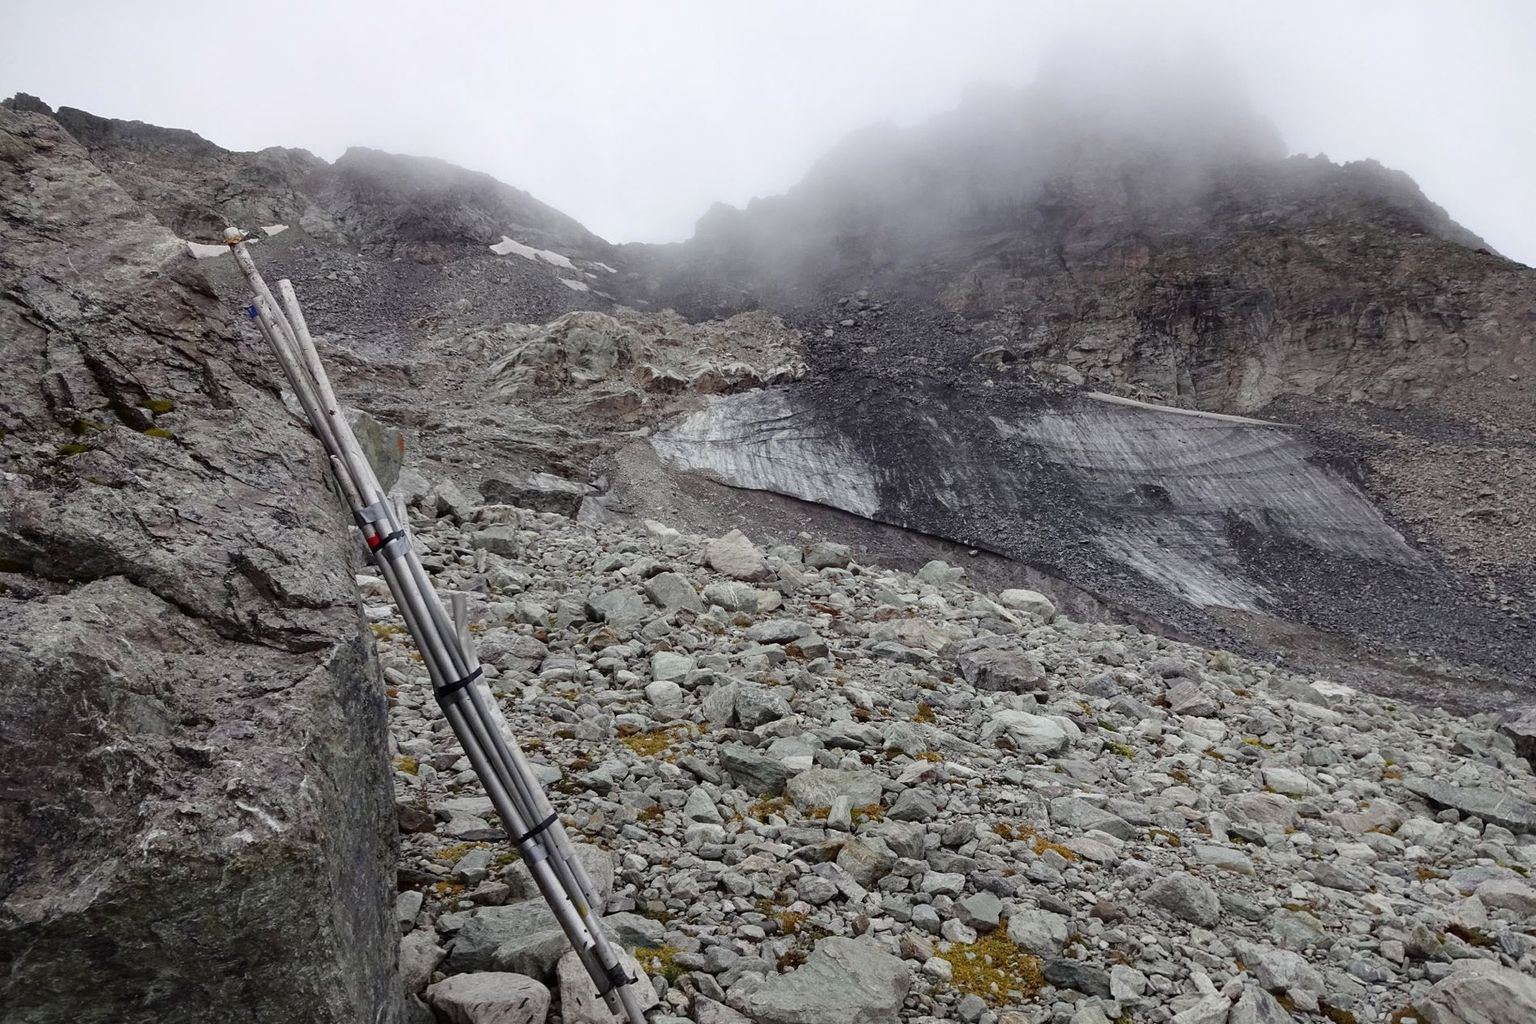 After the end of the series of measurements on the Pizol Glacier (SG) was heralded by a memorial service last autumn, this year the measurement material had to be cleared away from the meagre remaining ice.